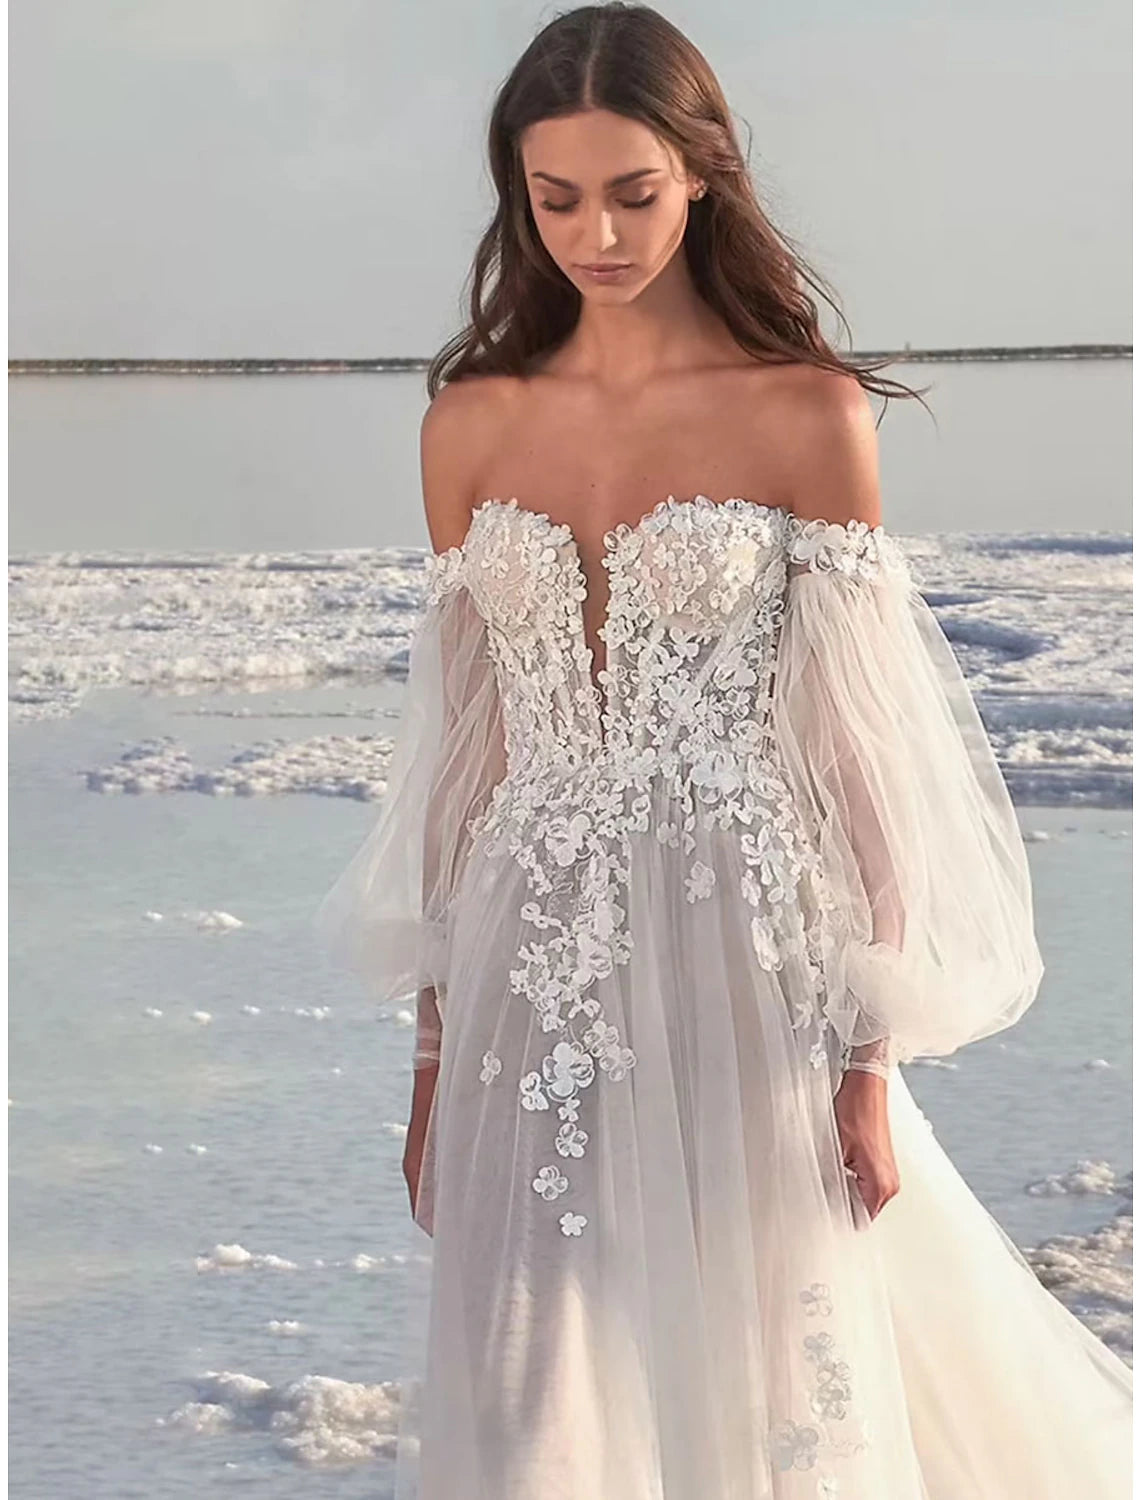 Beach Formal Wedding Dresses A-Line Off Shoulder Long Sleeve Court Train Lace Bridal Gowns With Appliques